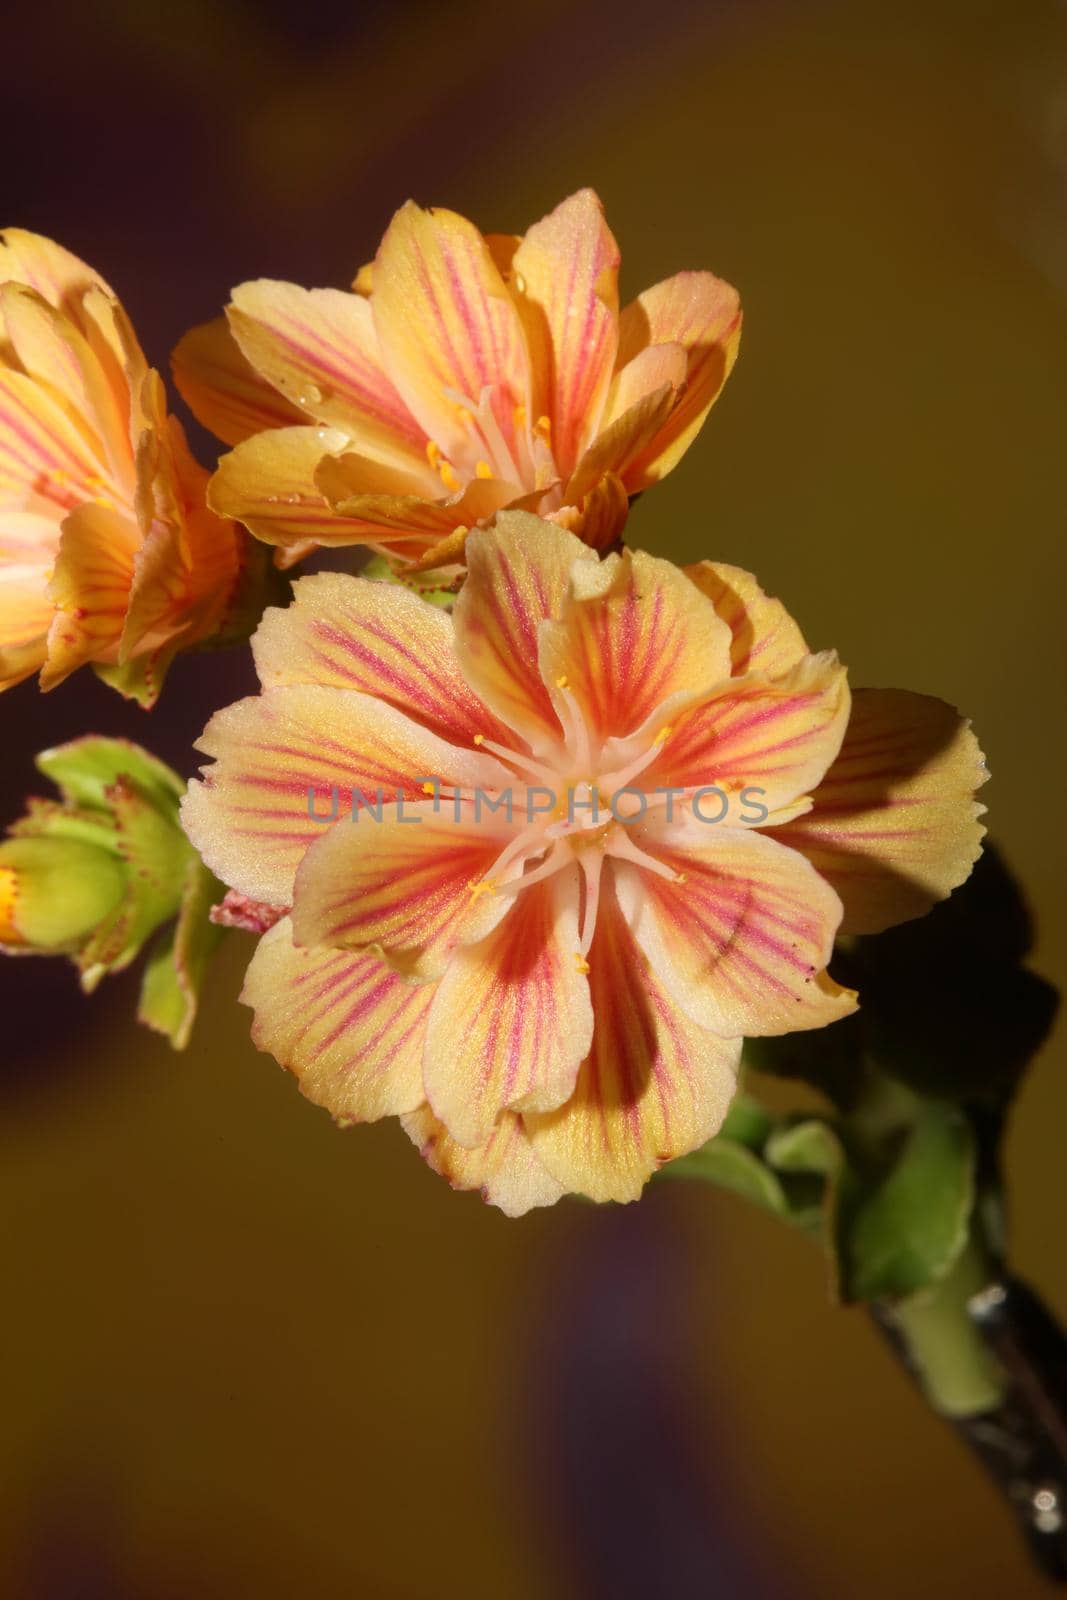 Flower blossoming close up modern botanical background lewisia cotyledon family montiaceae big size high quality prints home decoration